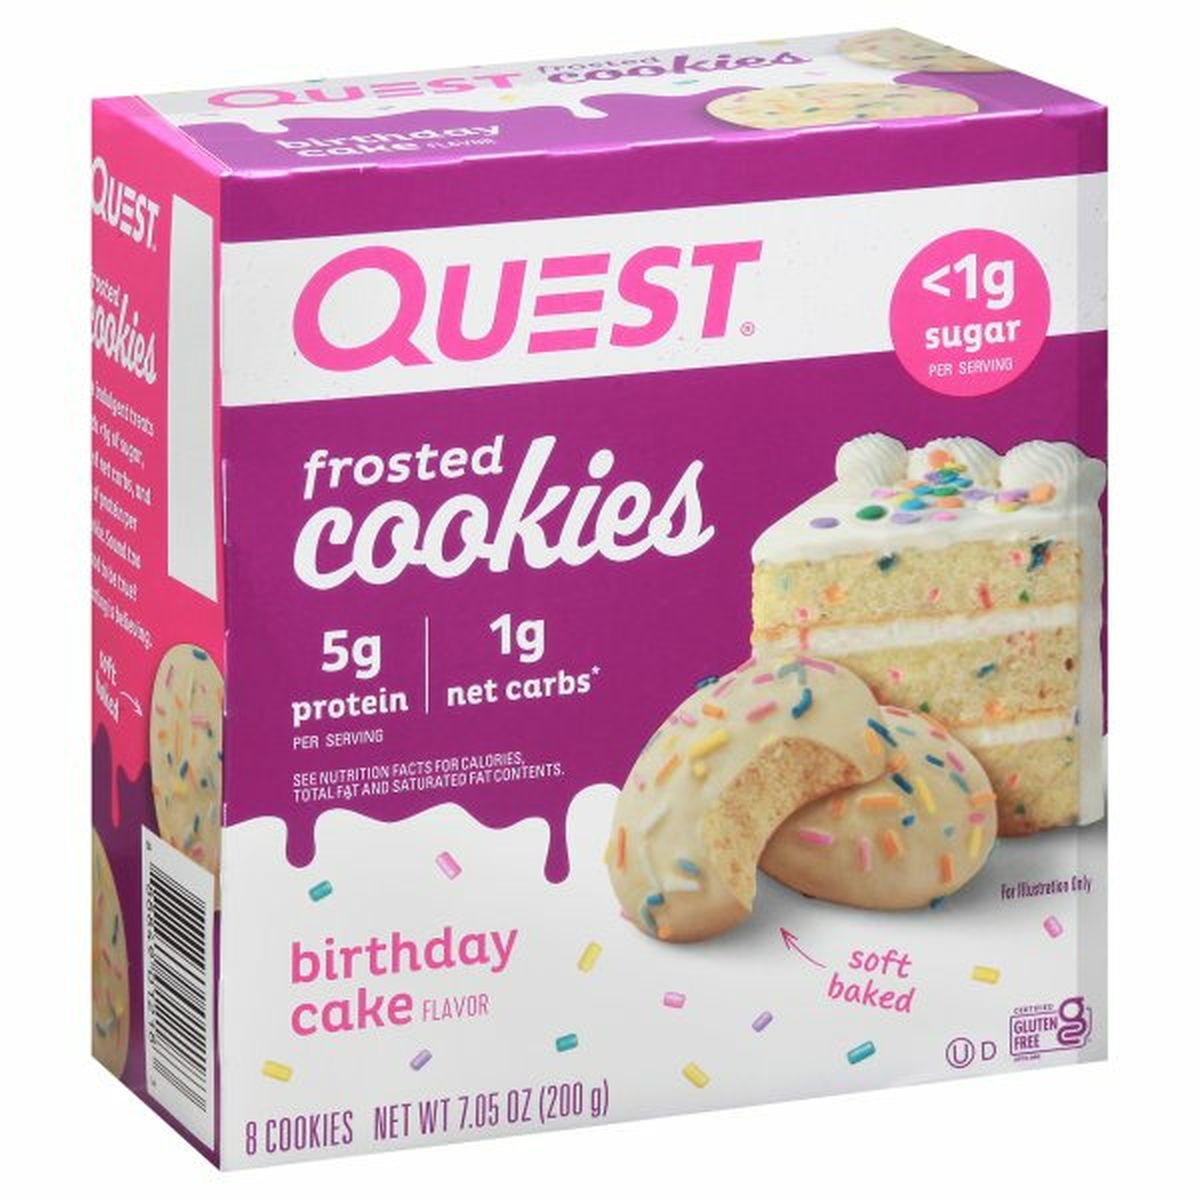 Calories in Quest Cookies, Frosted, Birthday Cake Flavor